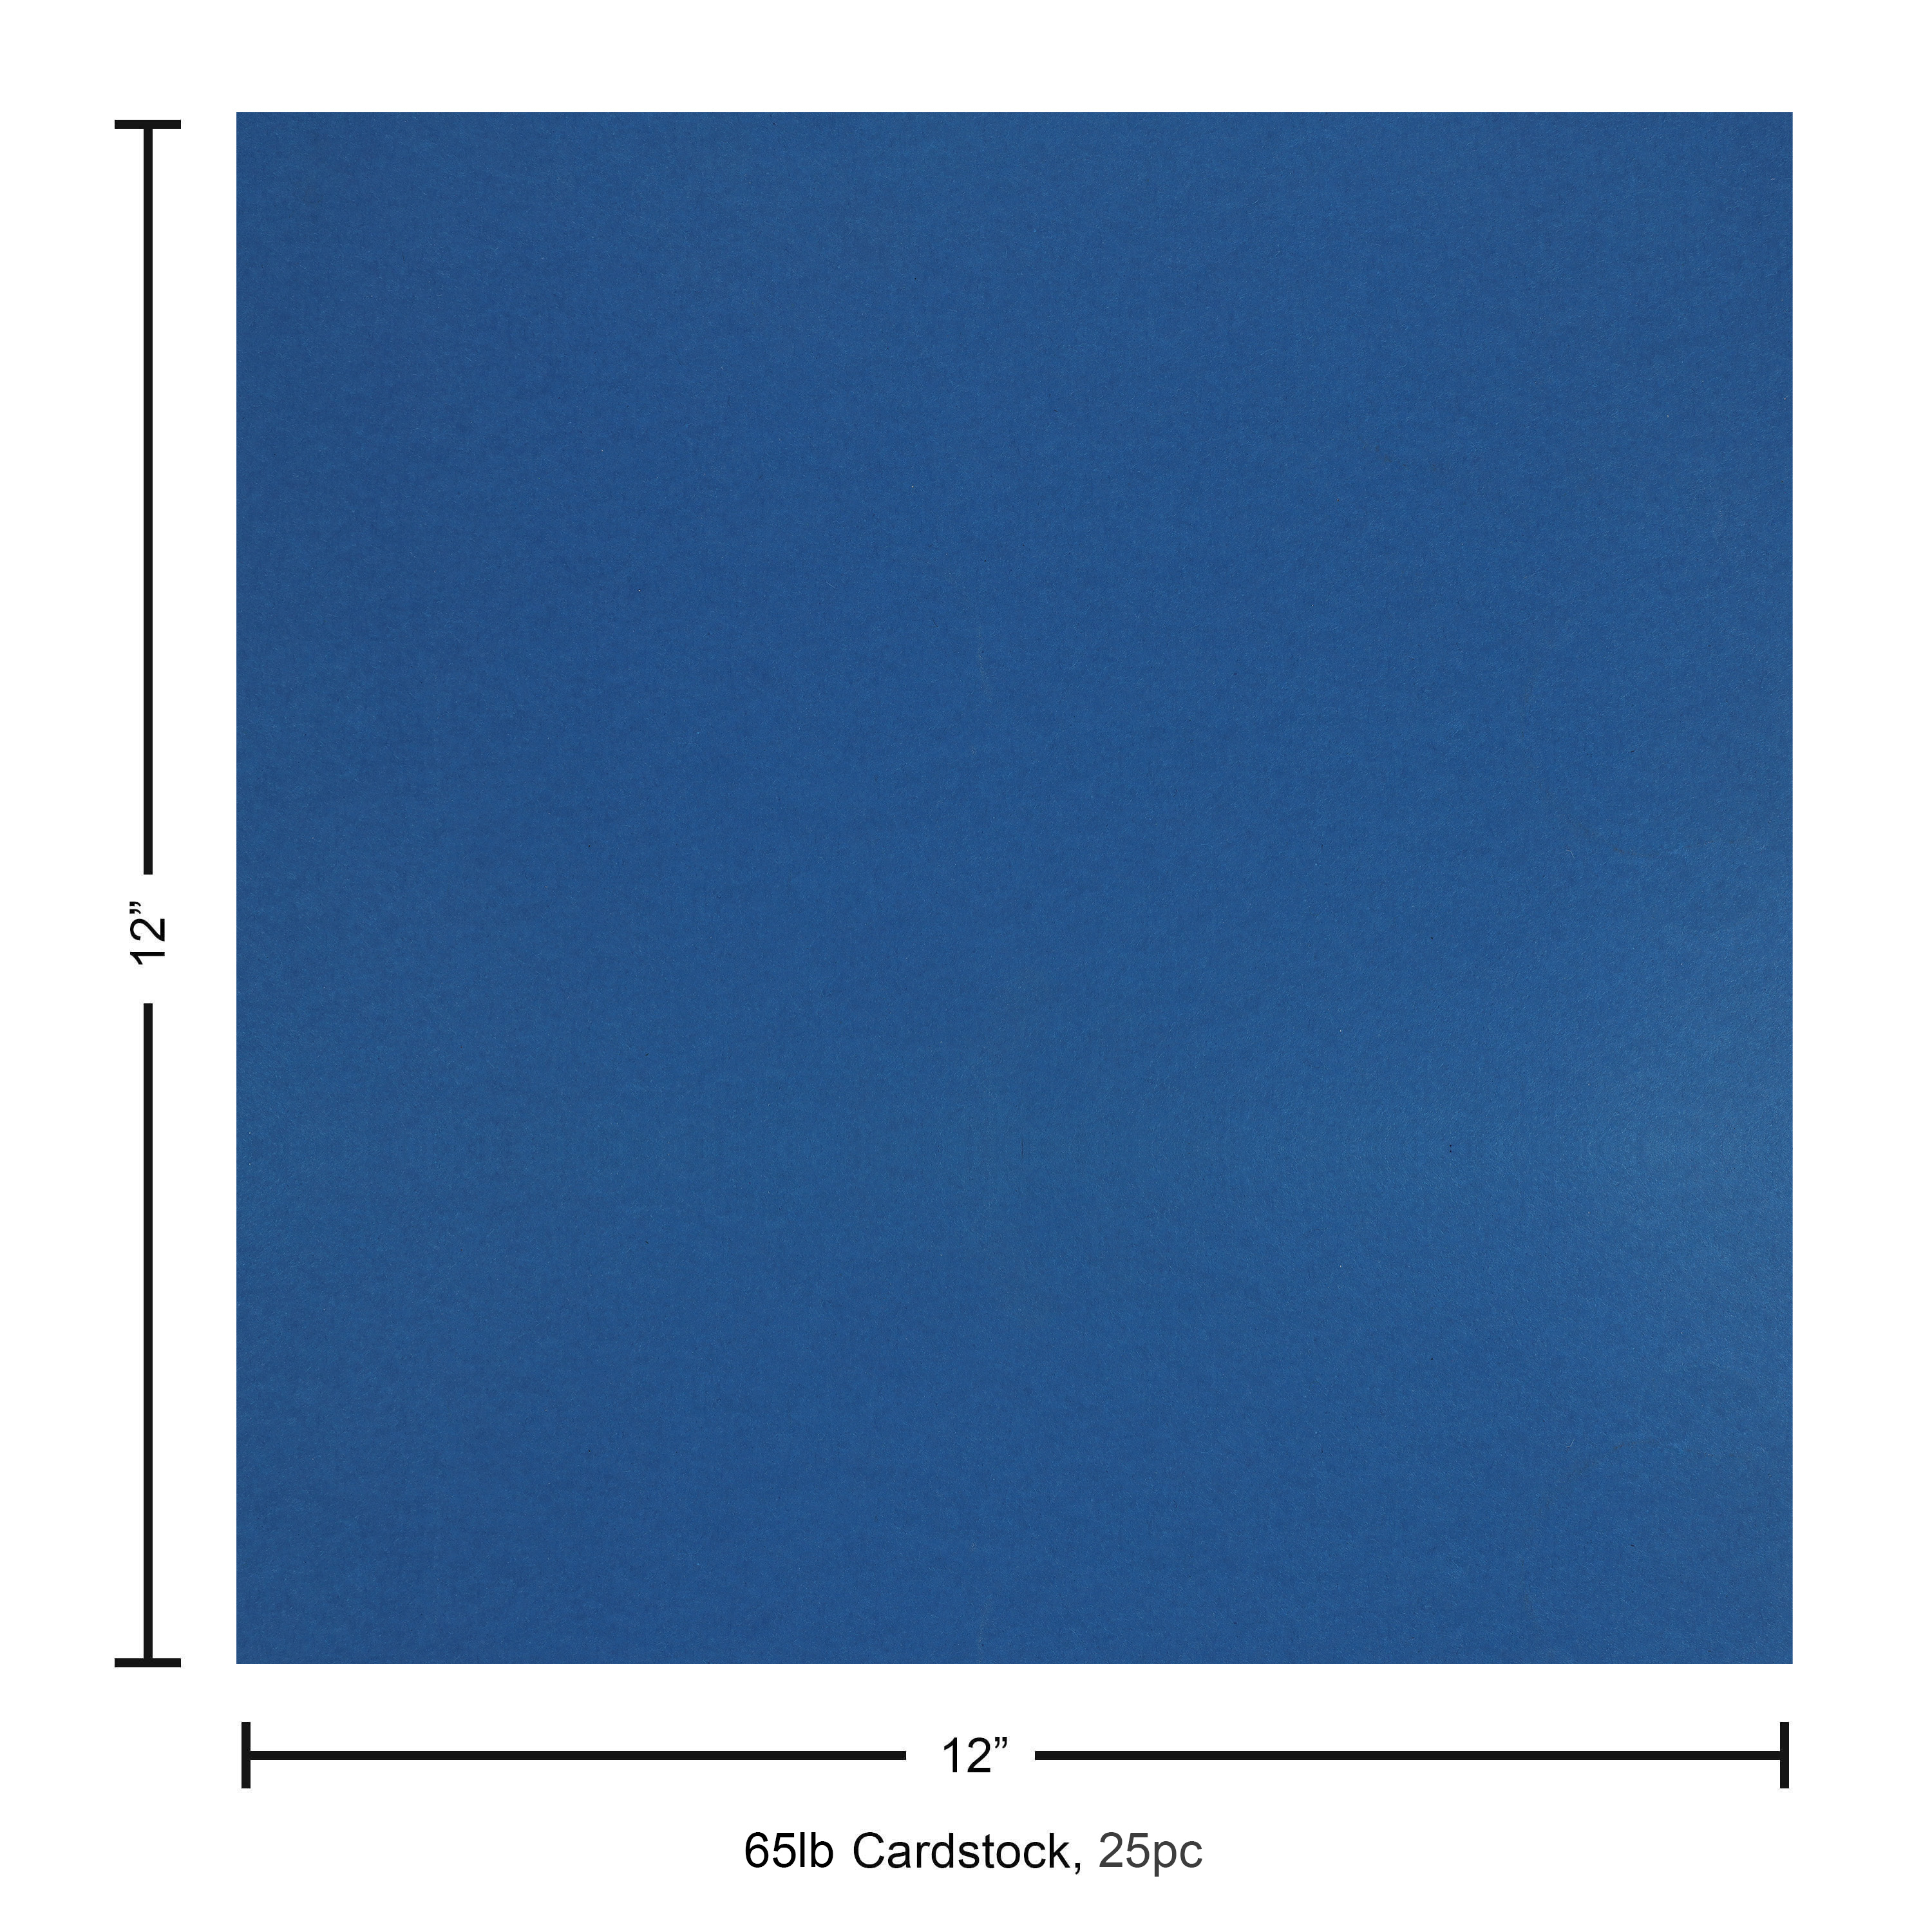 Paper Accents Cardstock 8.5x 11 Smooth 65lb Egyptian Blue 25pc - Leisure  Arts